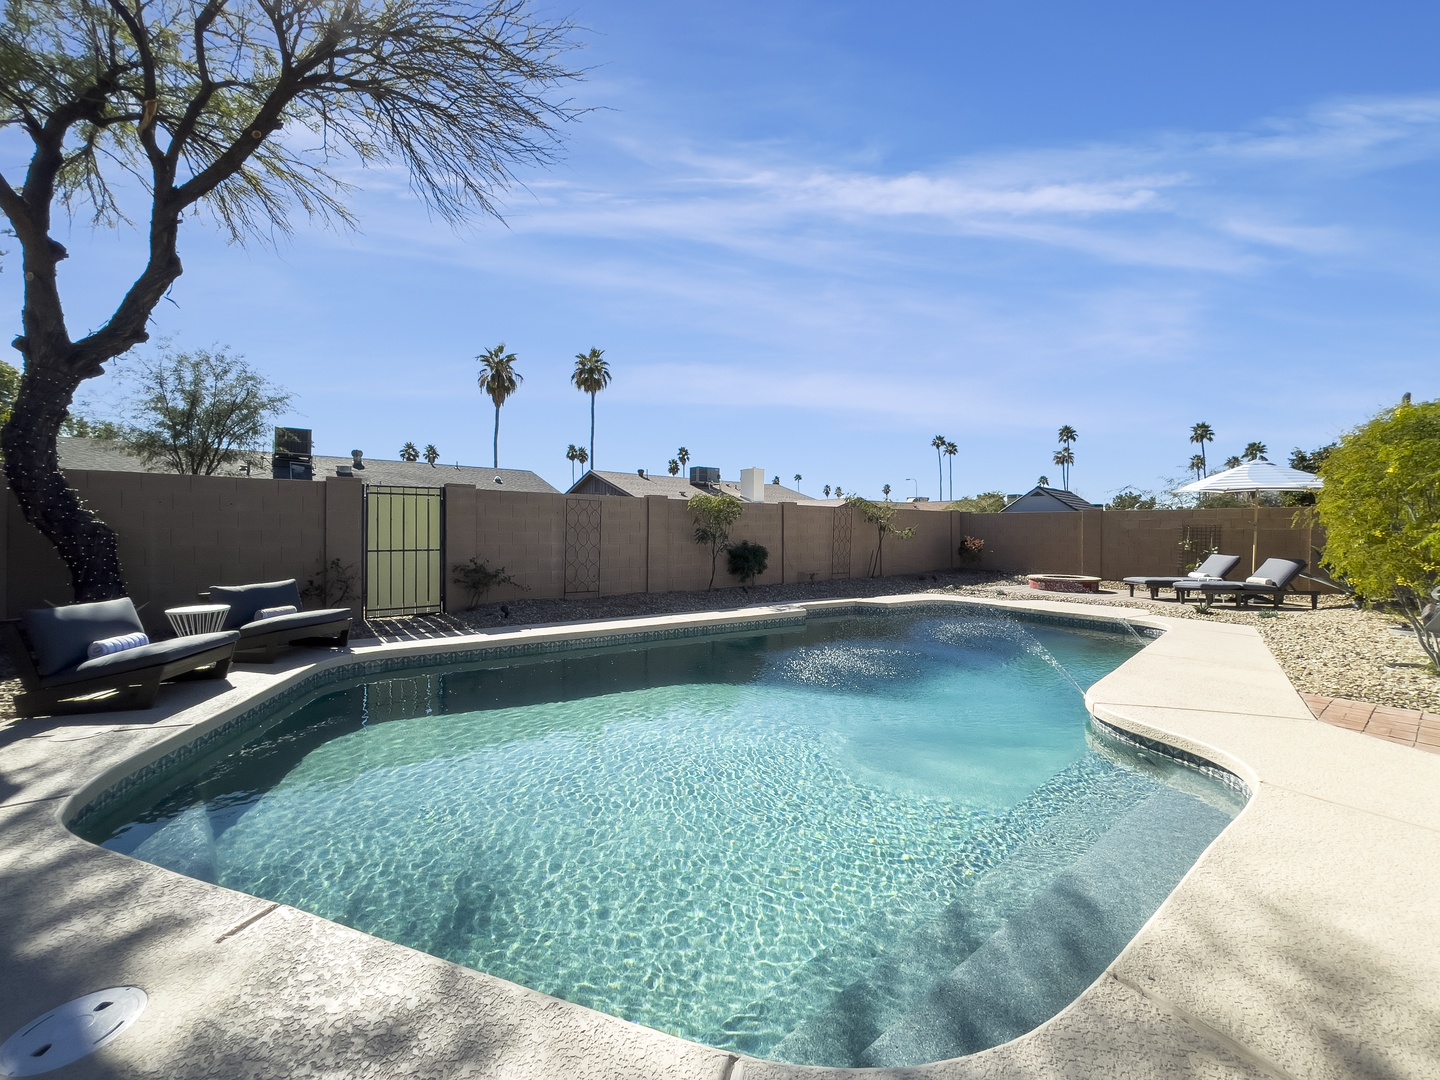 Private Outdoor *Heated Pool  *Pool heating will be available after March 4th, 2022. Heating fee is included in the nightly rate.